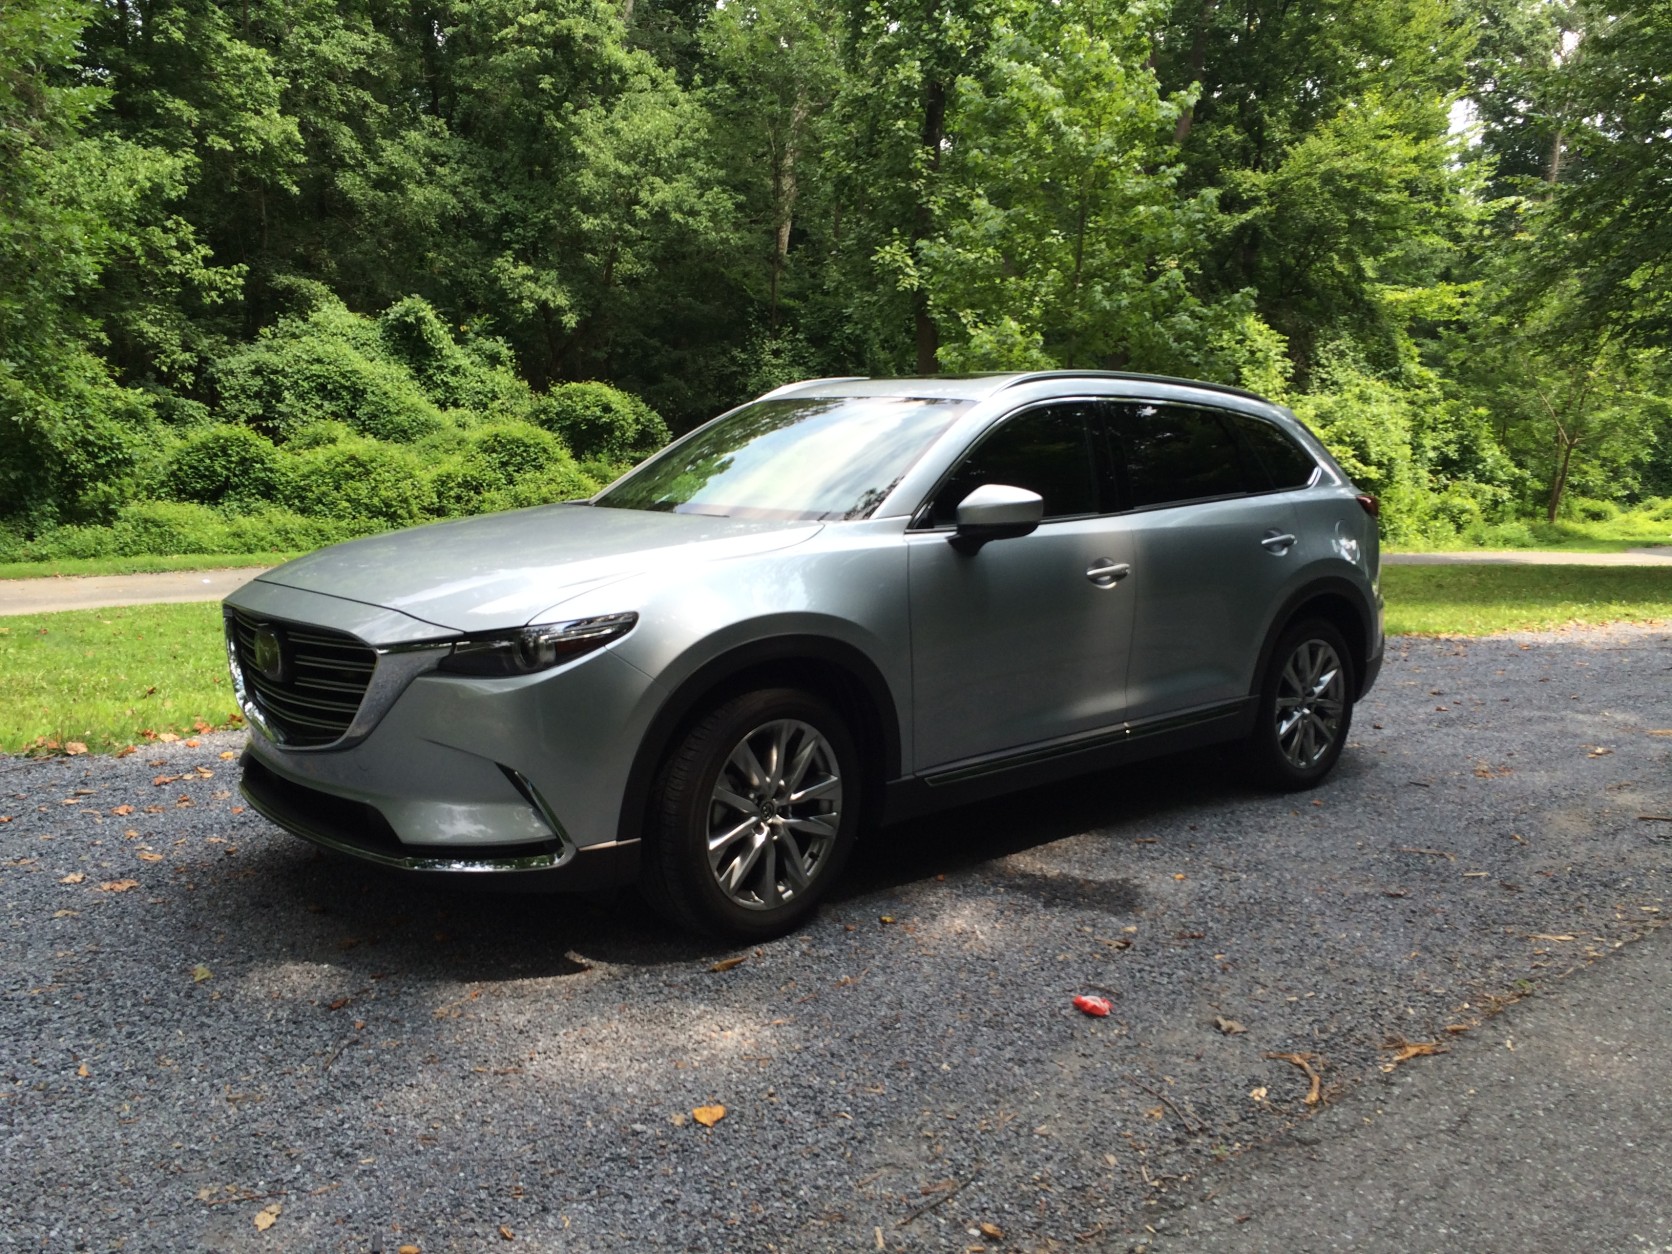 The Mazda CX-9 is reborn for 2016 with a different attitude maybe not as sporty as before but a better fit for more buyers. (WTOP/Mike Parris)